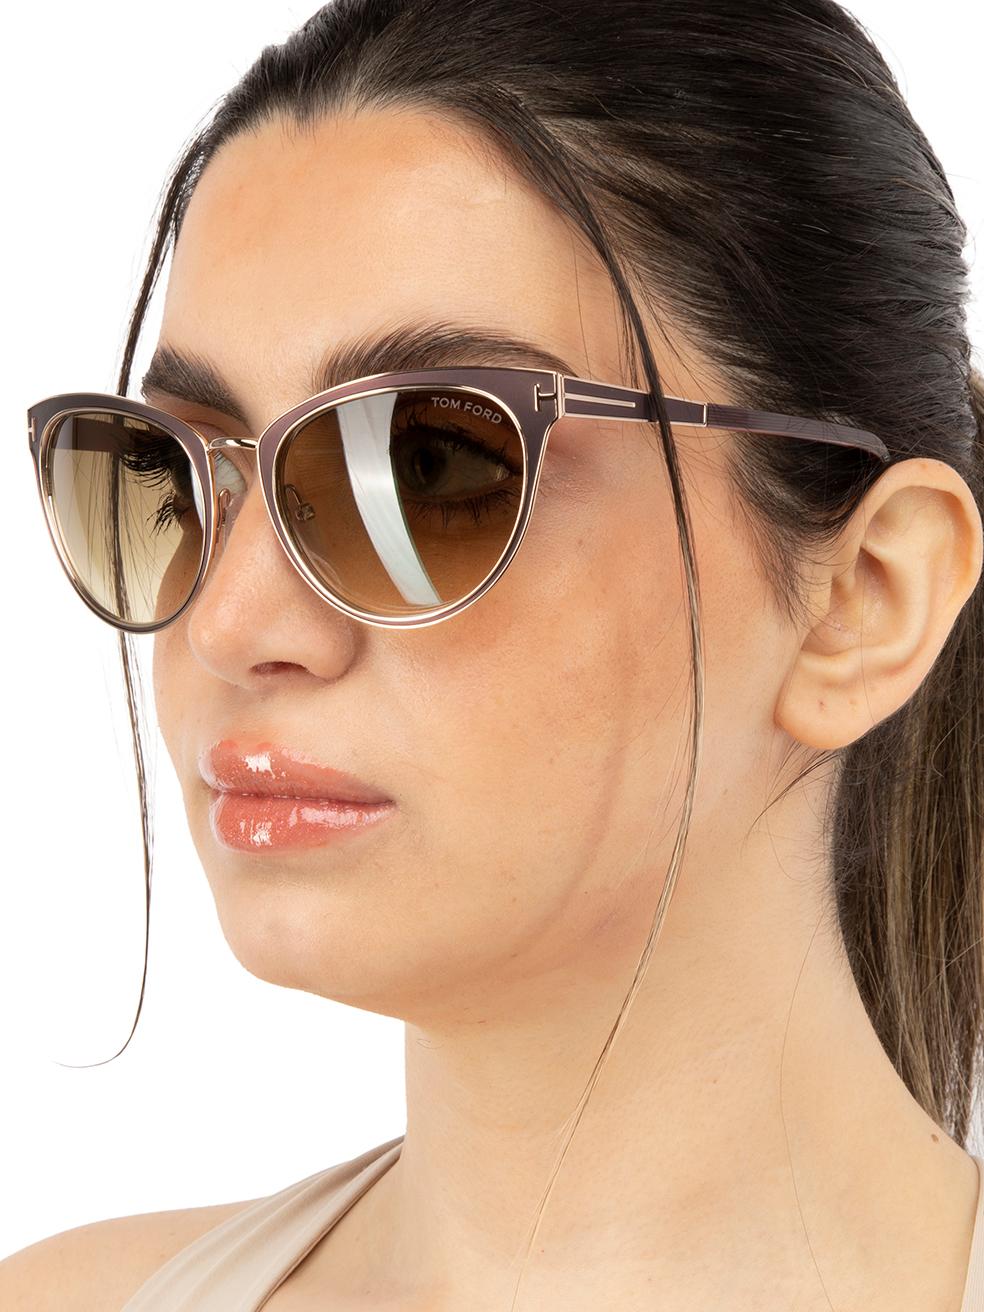 CONDITION is New with tags on this brand new Tom Ford designer item. This item comes with original packaging.
 
 
 
 Details
 
 
 Model: FT0373
 
 Shiny Dark Brown
 
 Metal
 
 Cat Eye Sunglasses
 
 Brown Gradient Lens
 
 Full-Rim
 
 100% UV